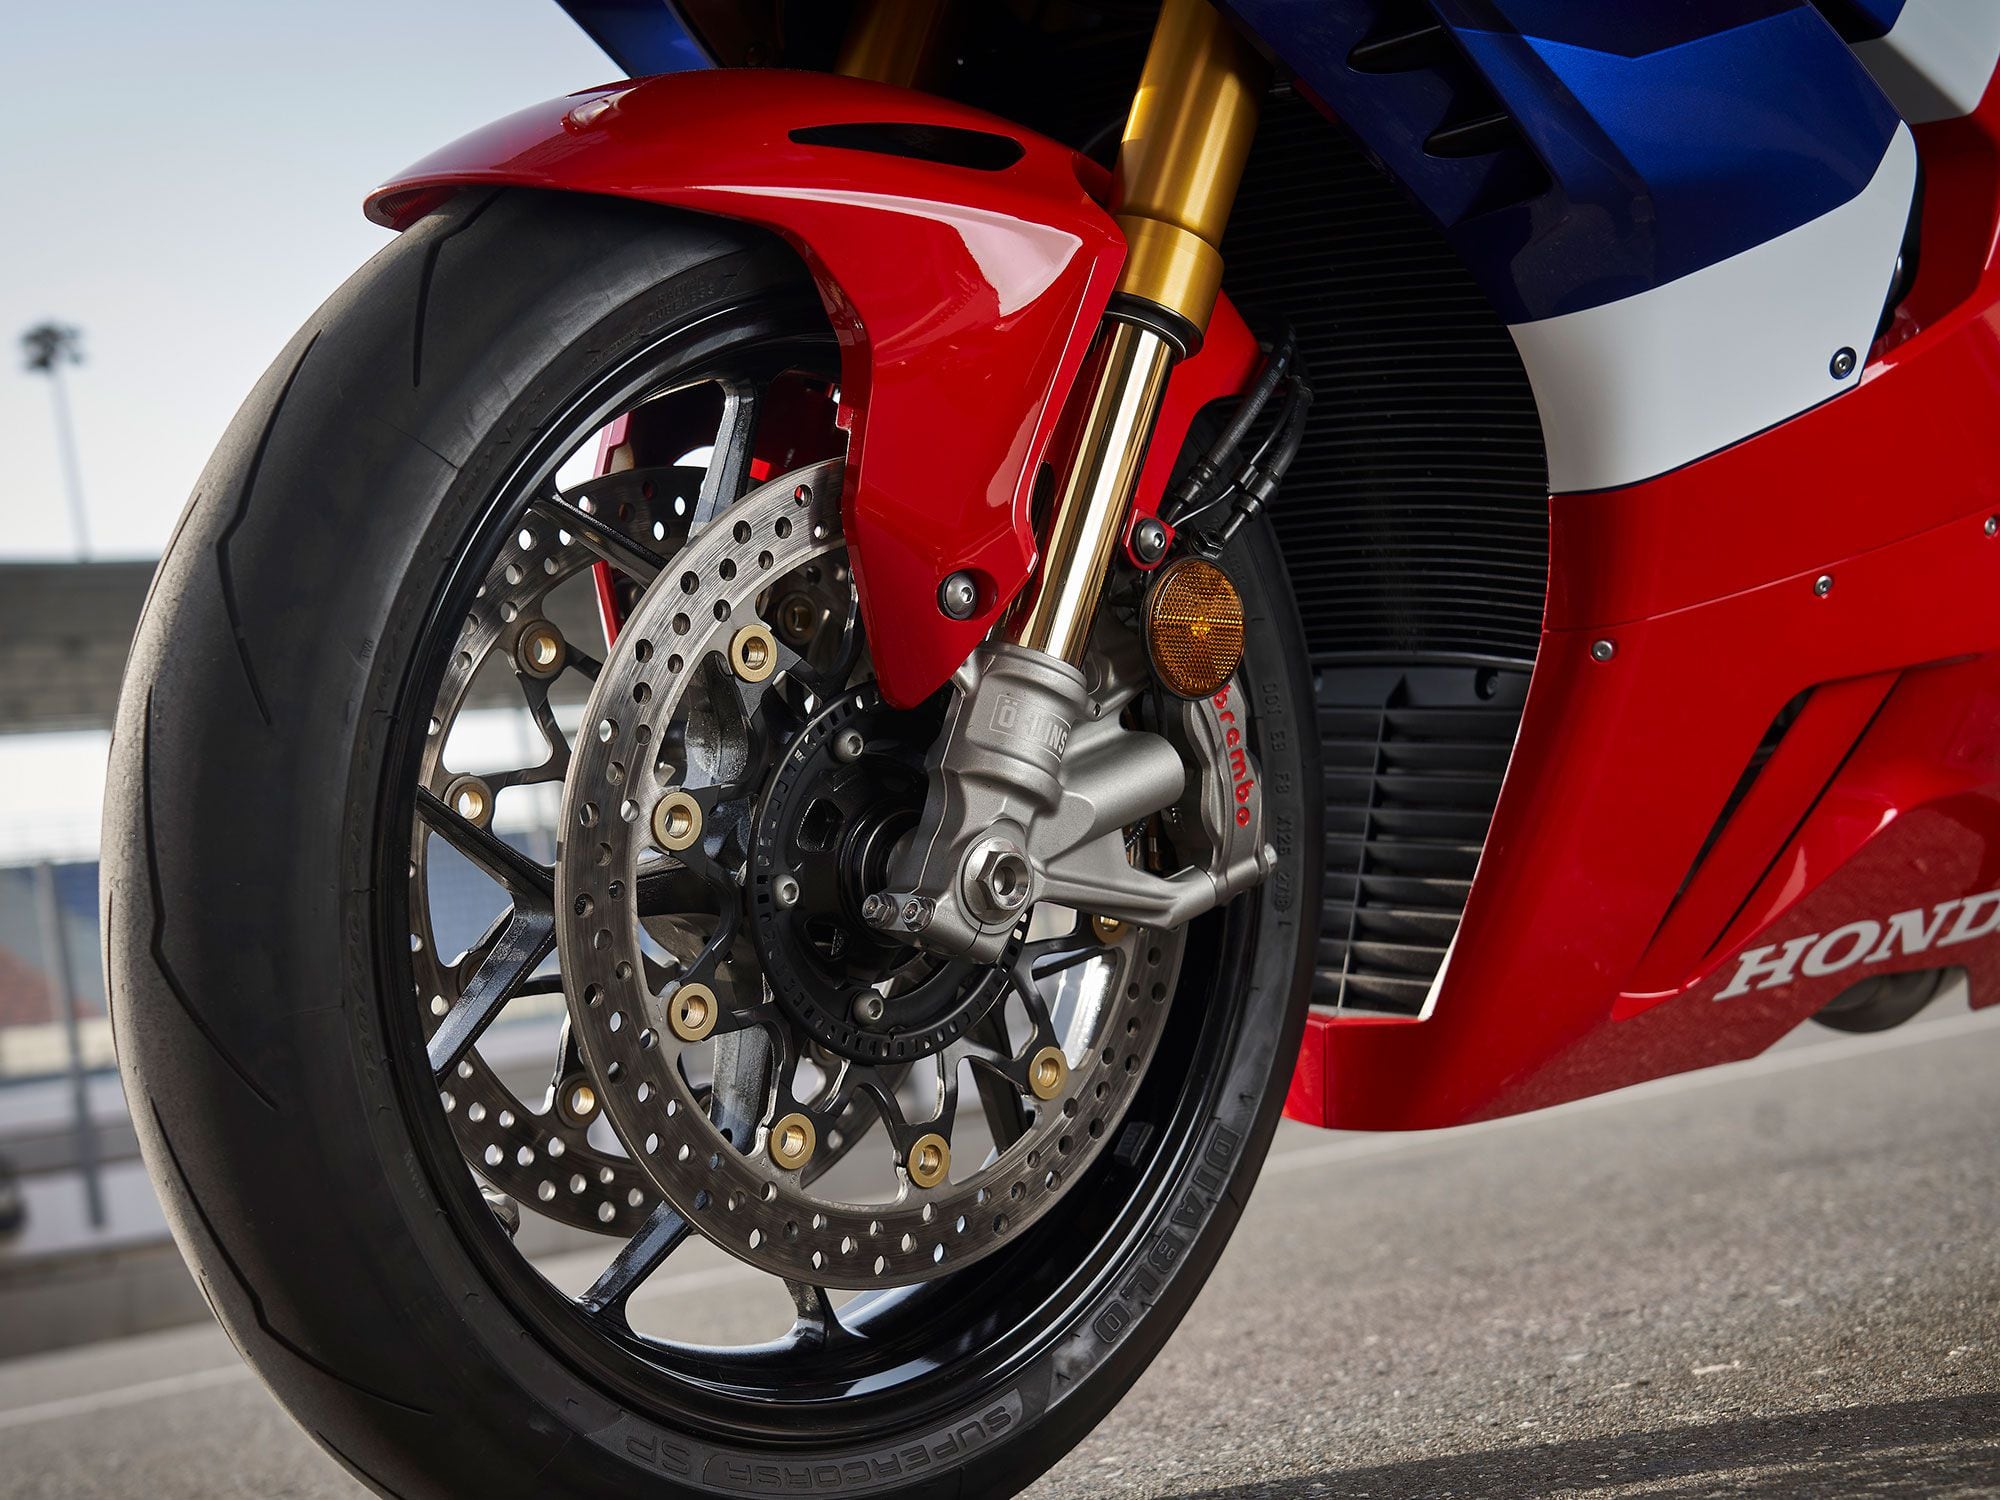 Honda fitted the CBR with a set of top-shelf Brembo Stylema calipers and 330mm discs to bring it to a quick halt.